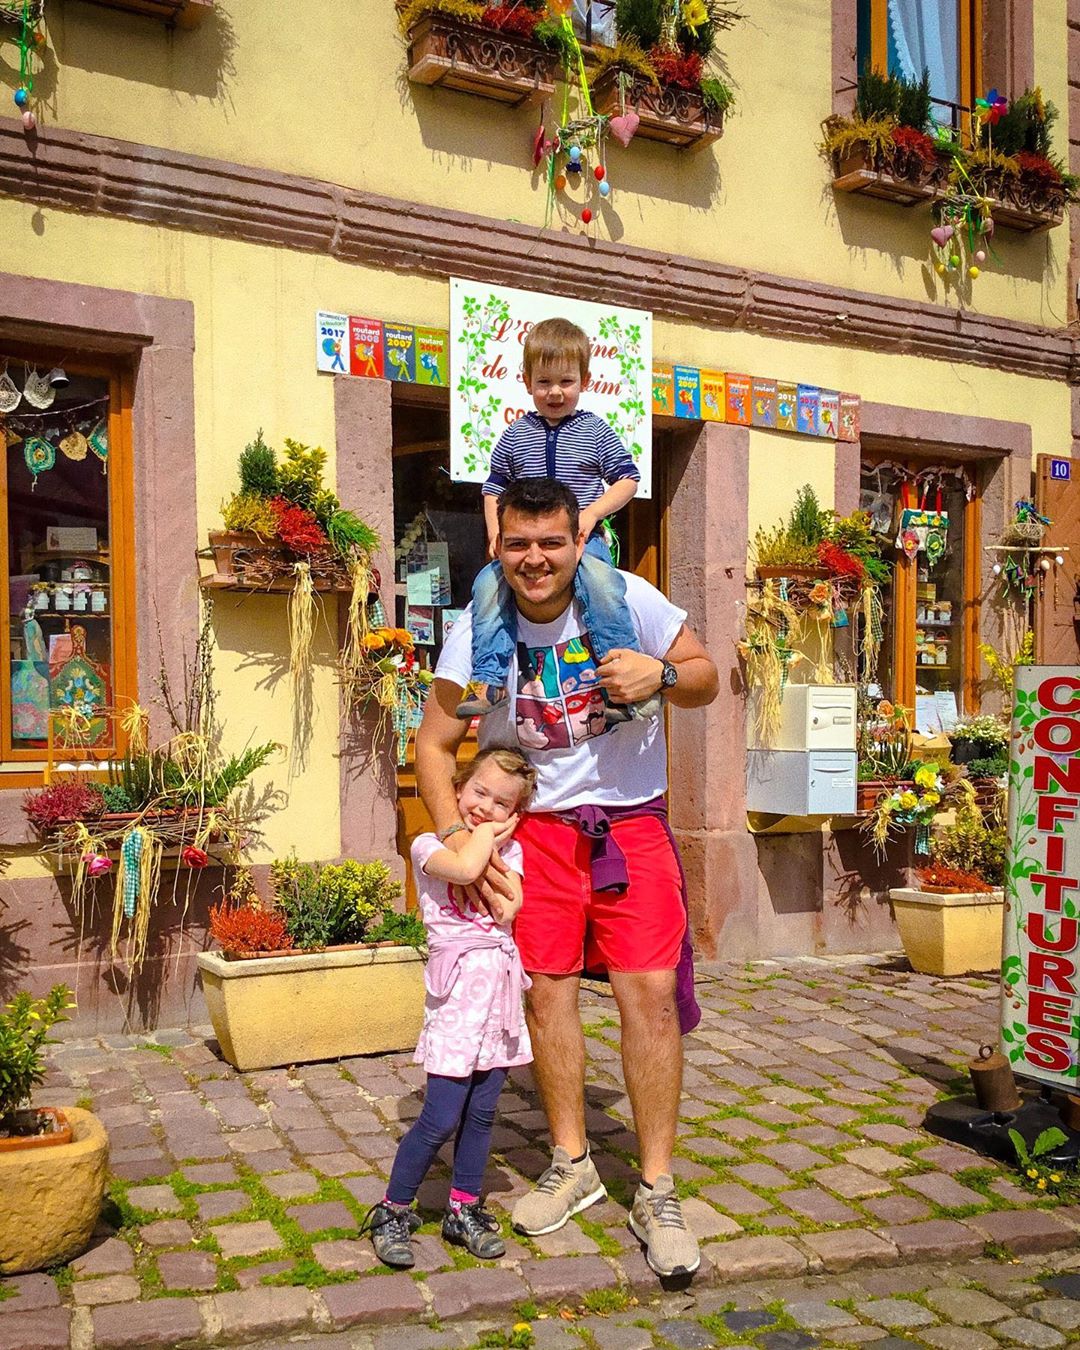 Au pair with children in Alsace, France. Photo by Instagram user @angelo.saenzmedina